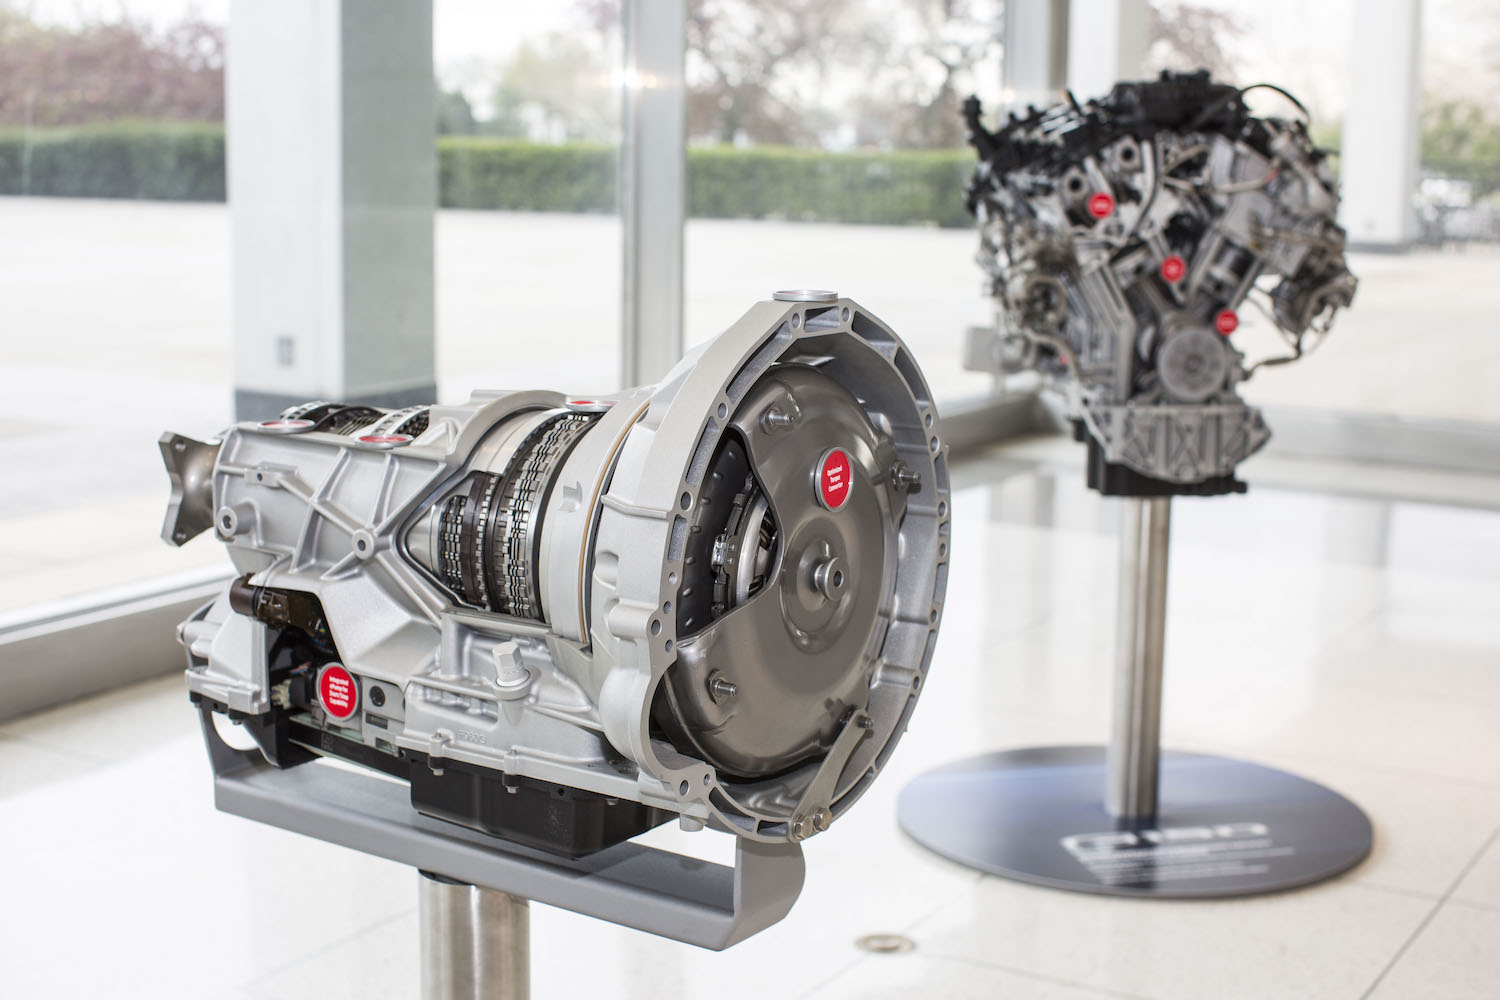 A Ford F-150 10-speed automatic transmission on display in a museum.